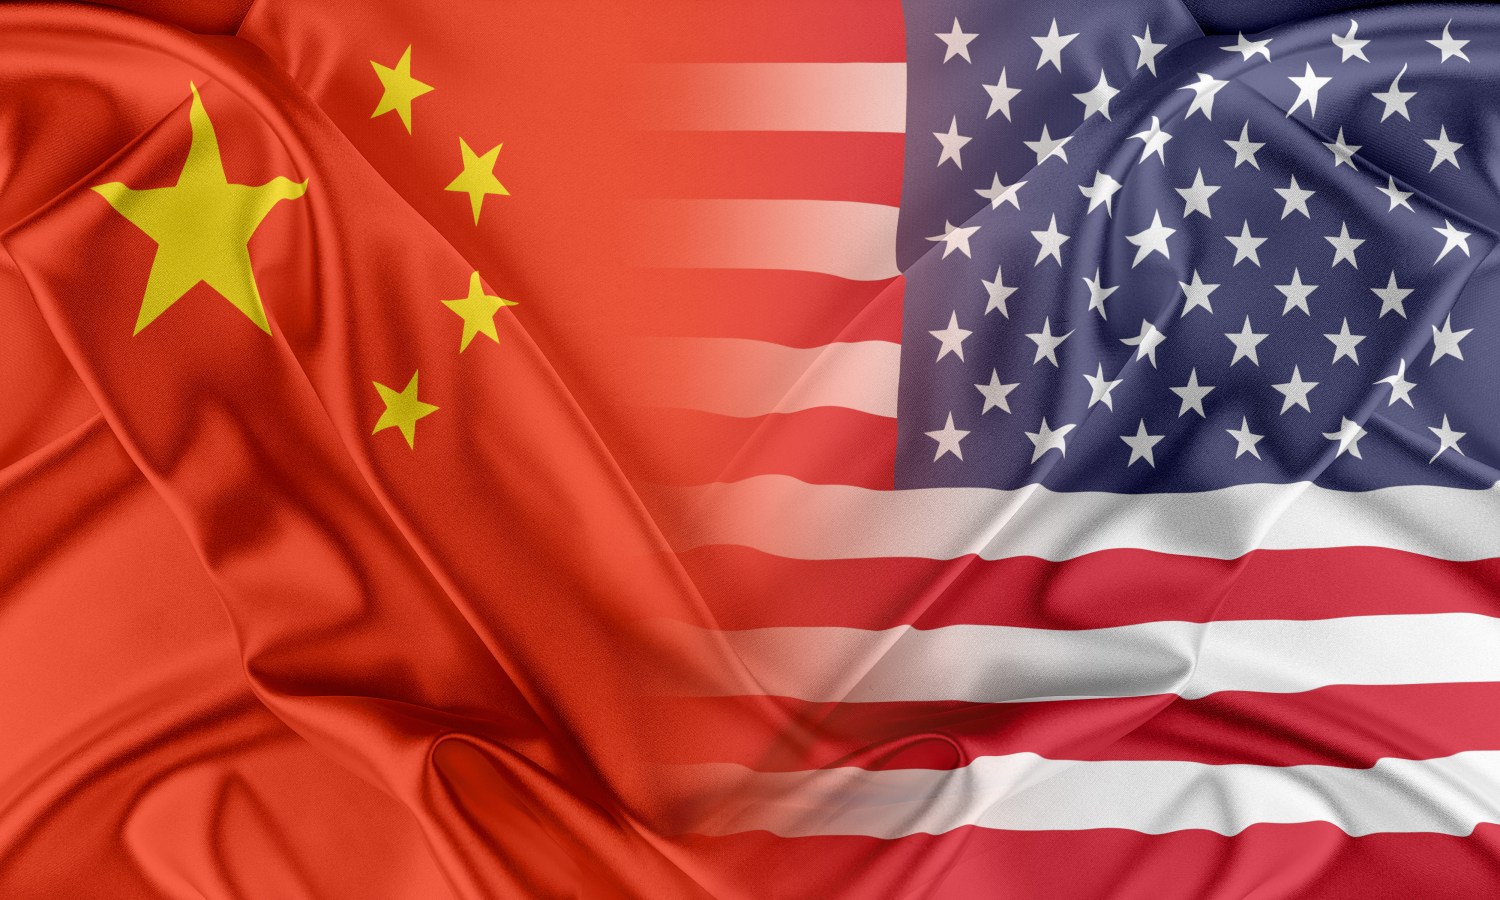 Images of the Chinese and American flags